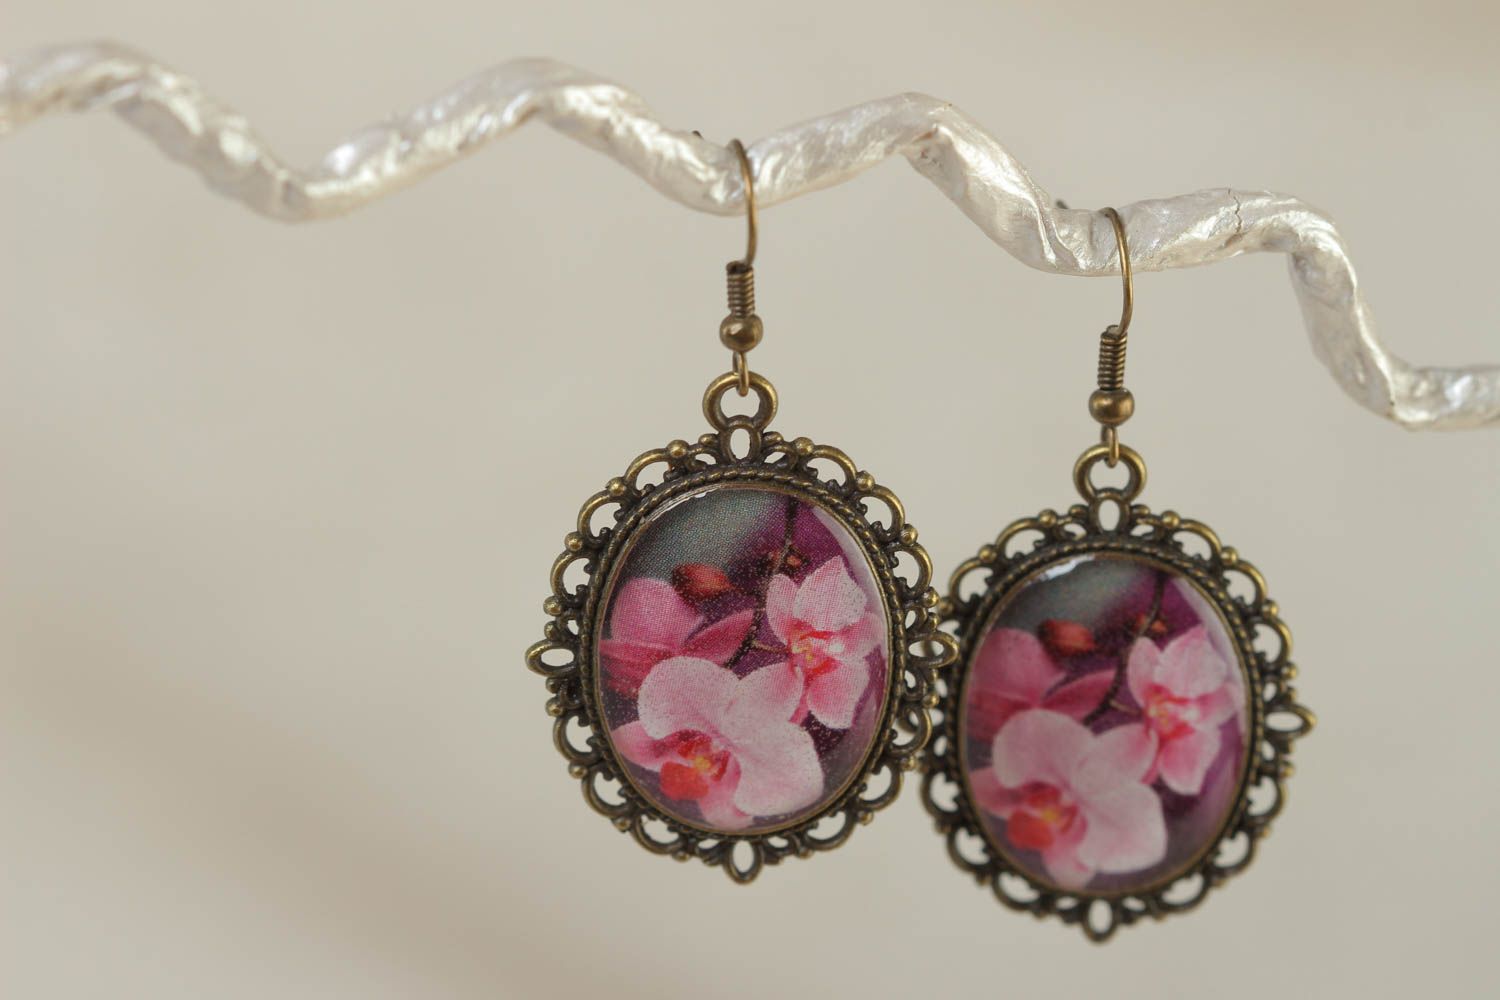 A set of handmade vintage earrings made of glass glaze with metal fittings and flower print photo 1